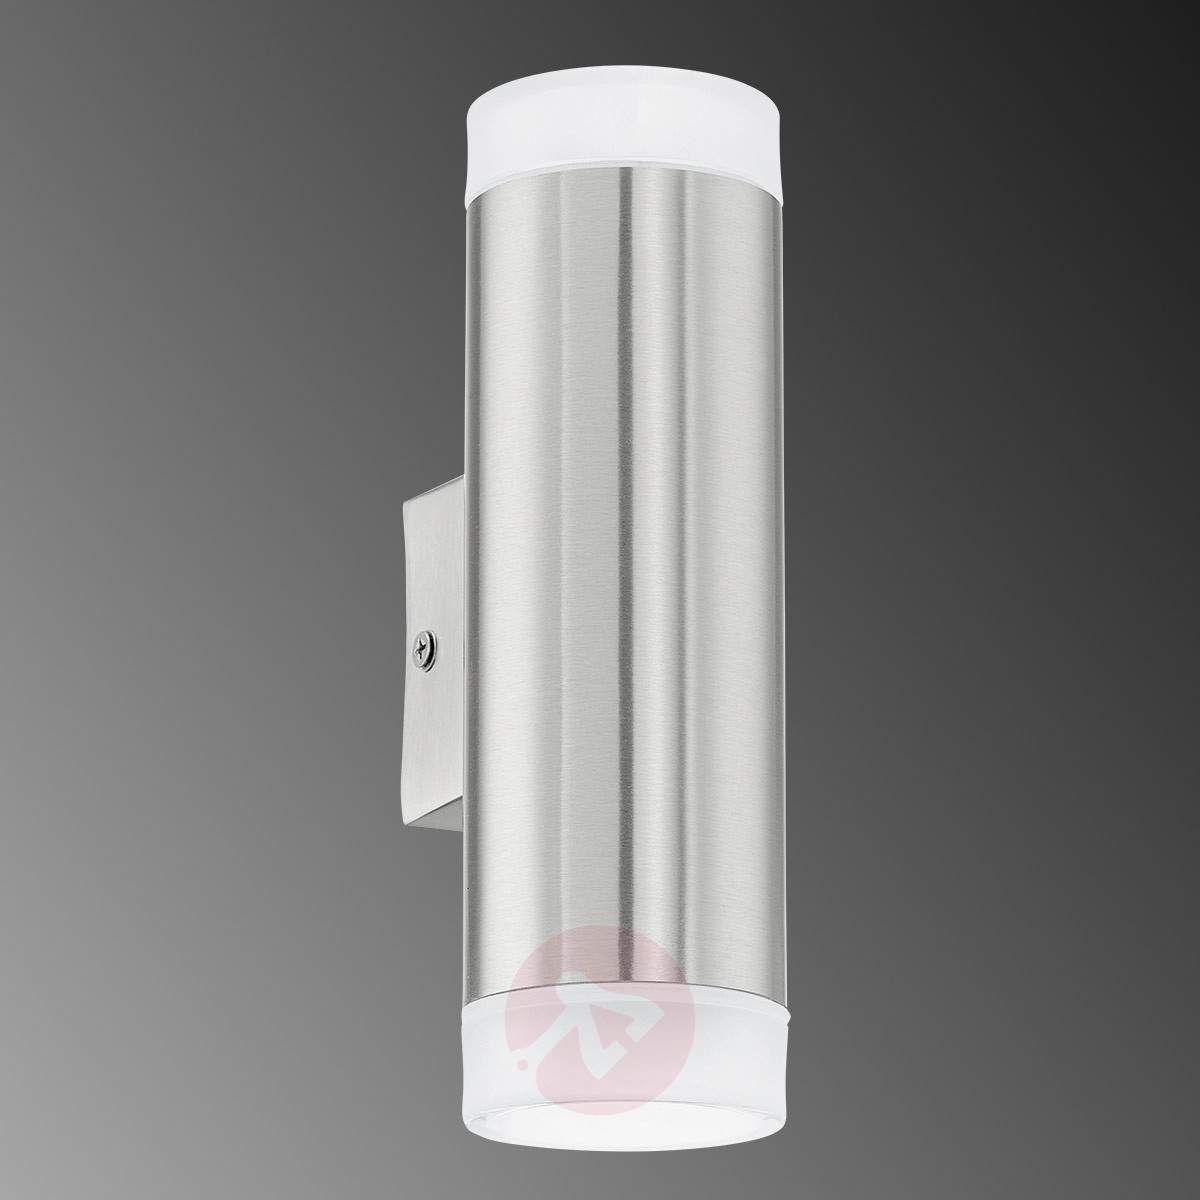 Riga Up Down Led Outside Wall Light | Lights.ie With Regard To Outside Wall Down Lights (Photo 11 of 15)